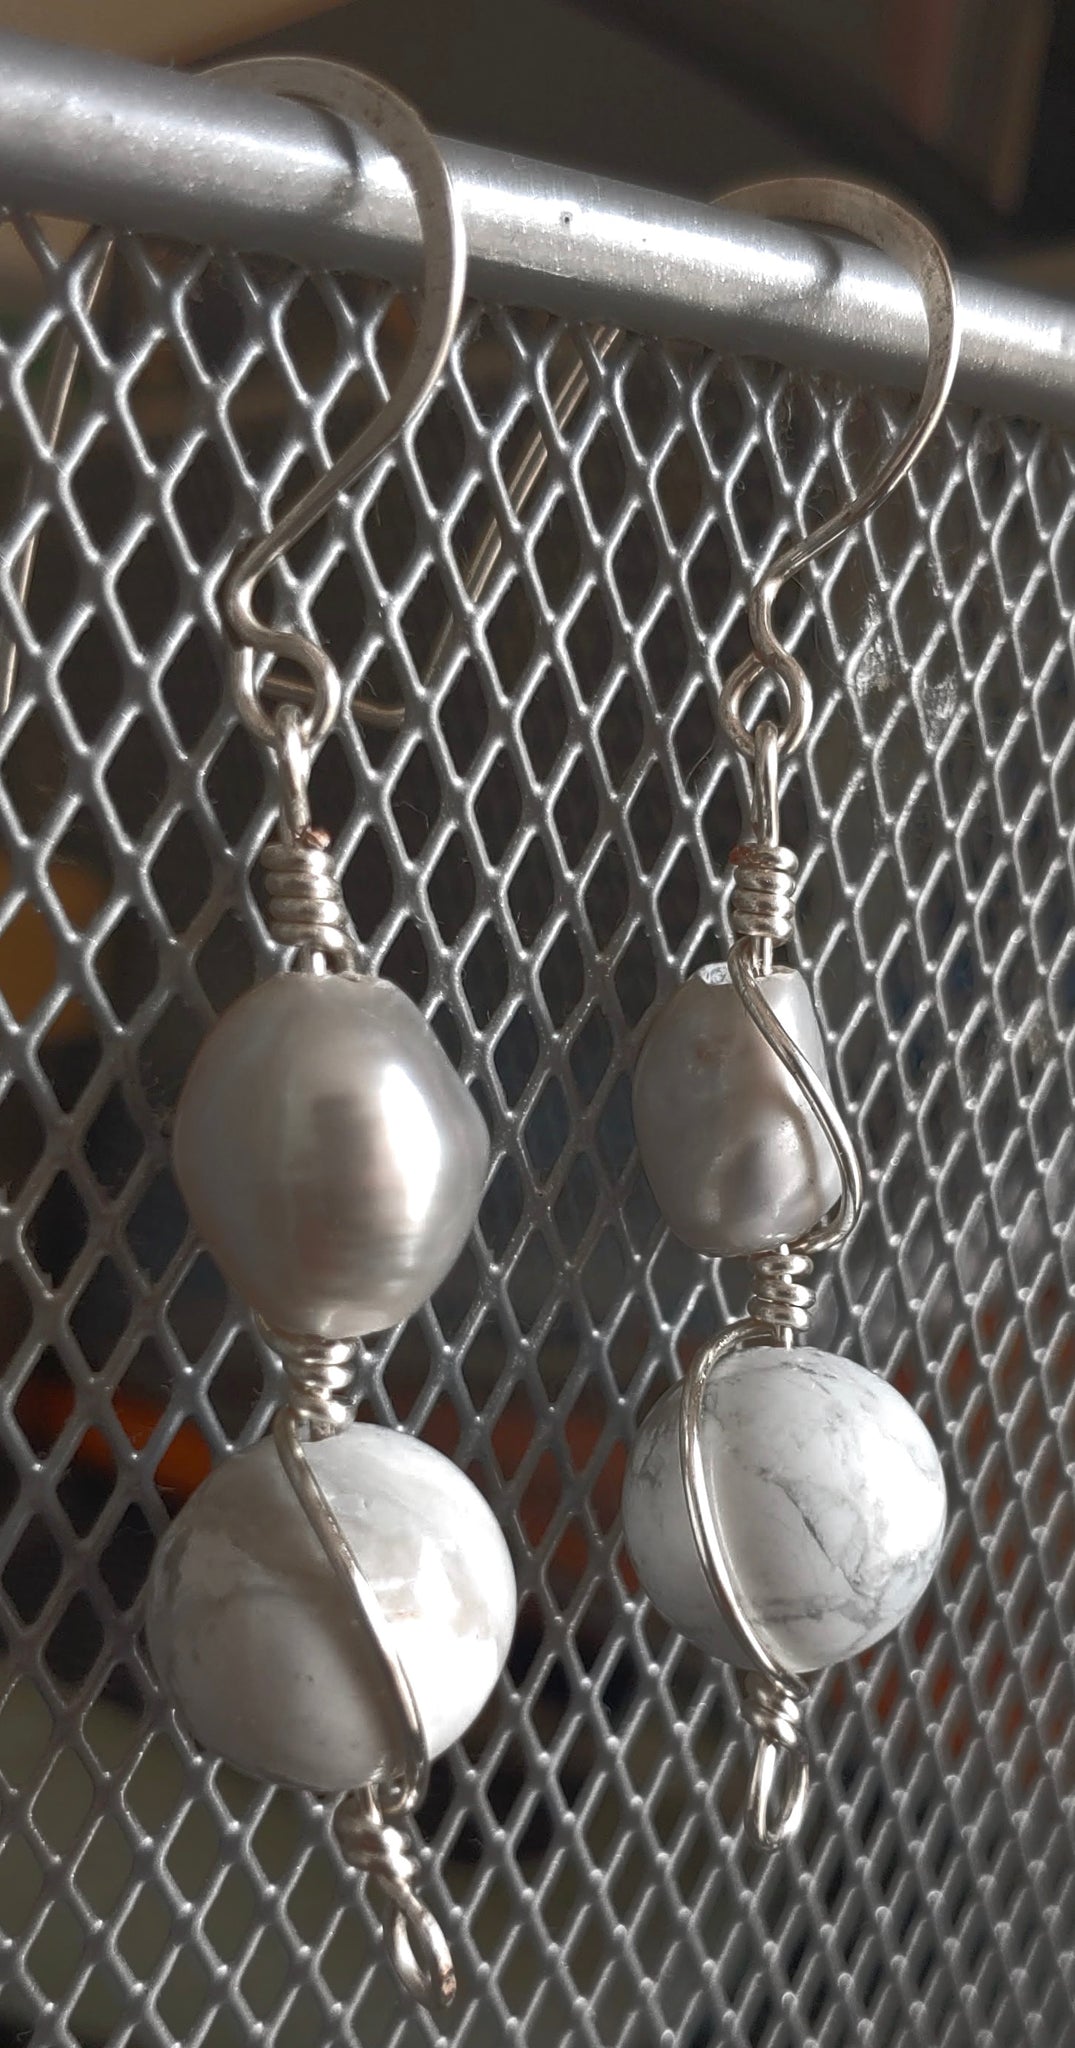 Grey pearl and marbleized beads with wire wrapping dangle earrings